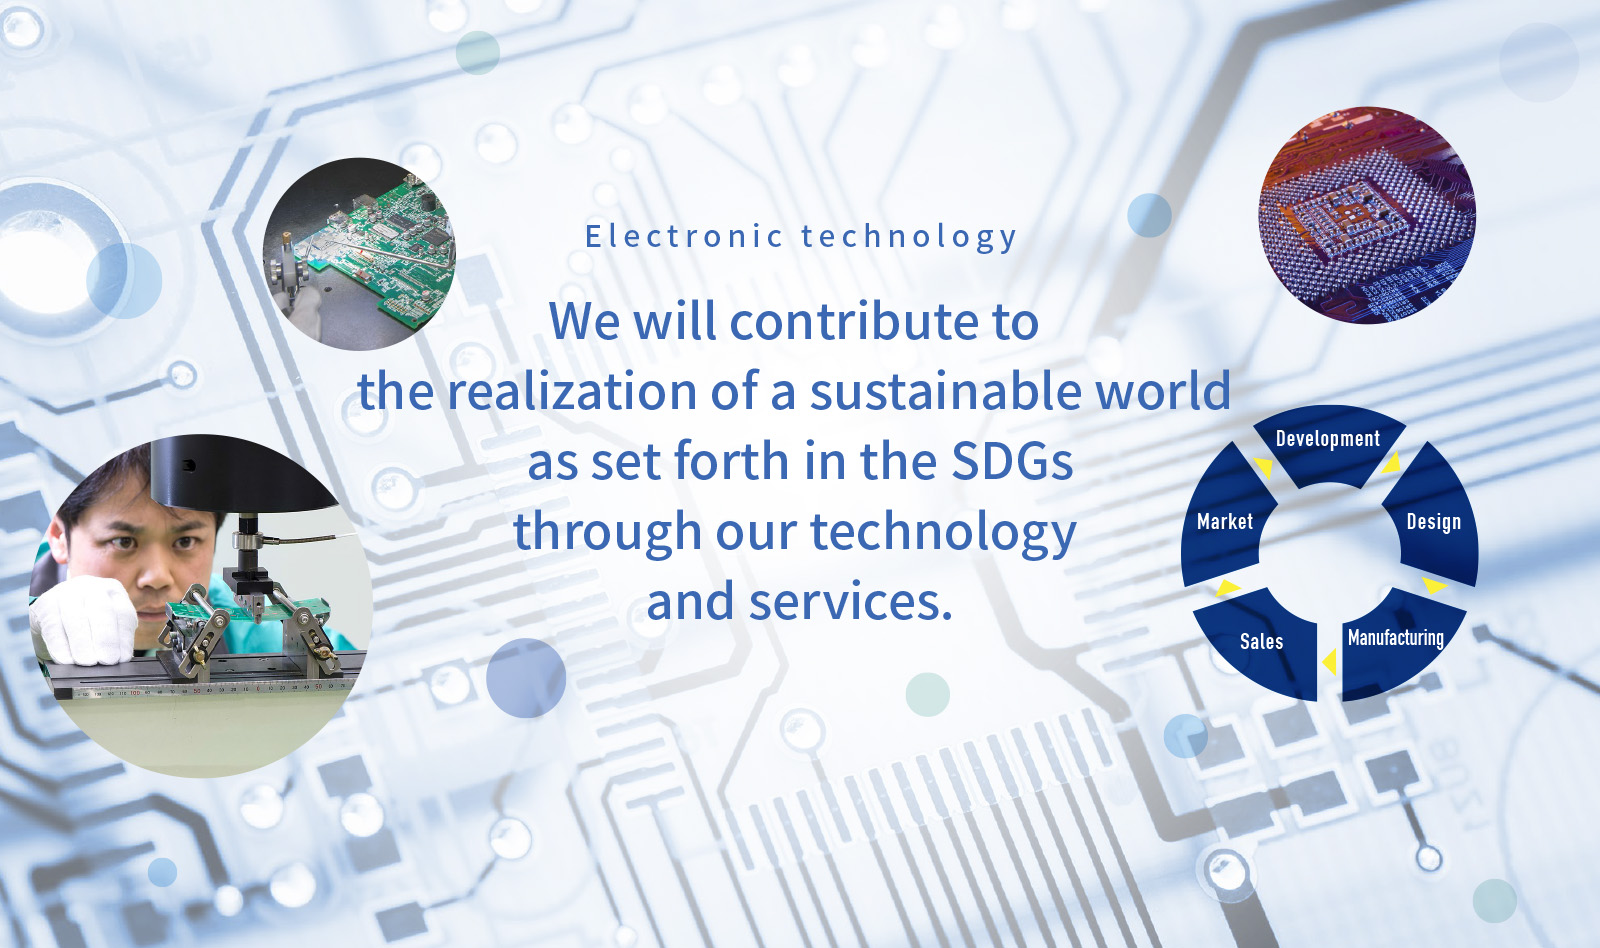 We will contribute to the realization of a sustainable world as set forth in the SDGs through our technology and services.